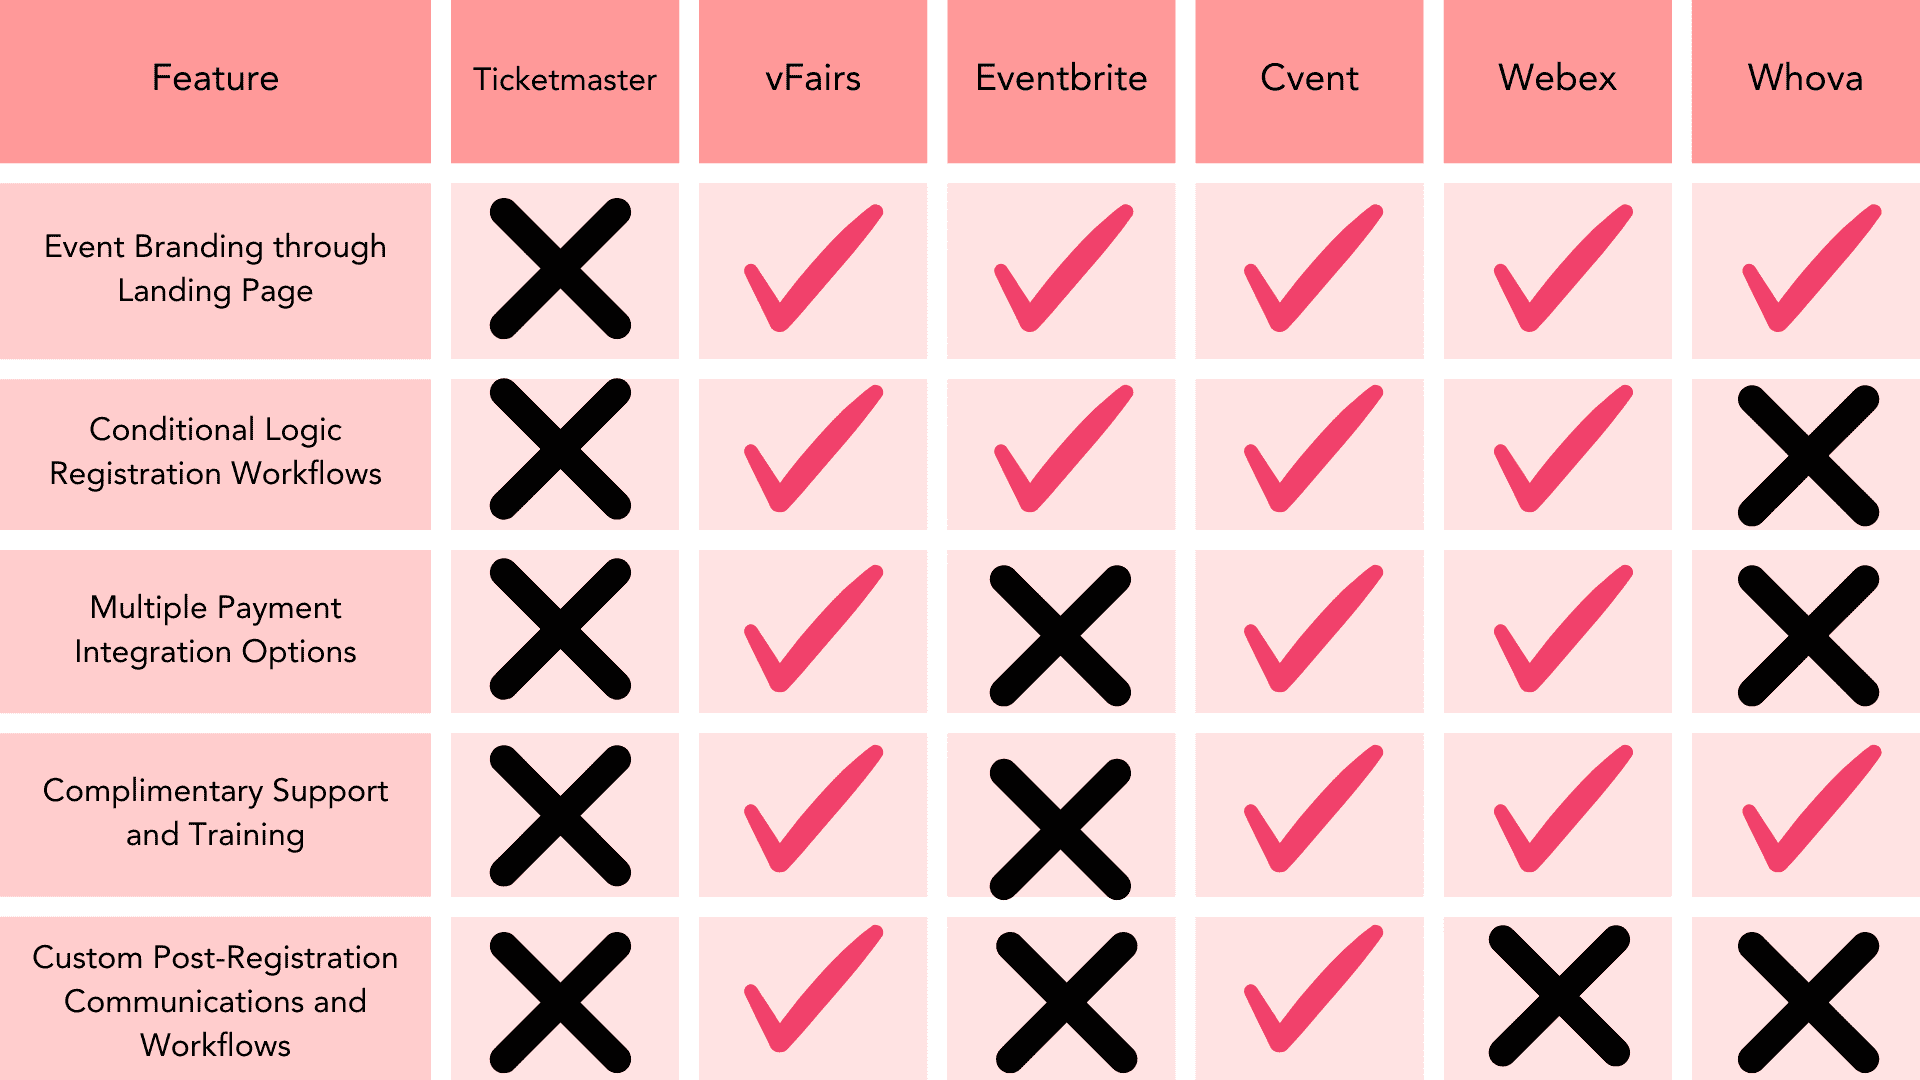 Comparison of Ticketmaster competitors by popular feature